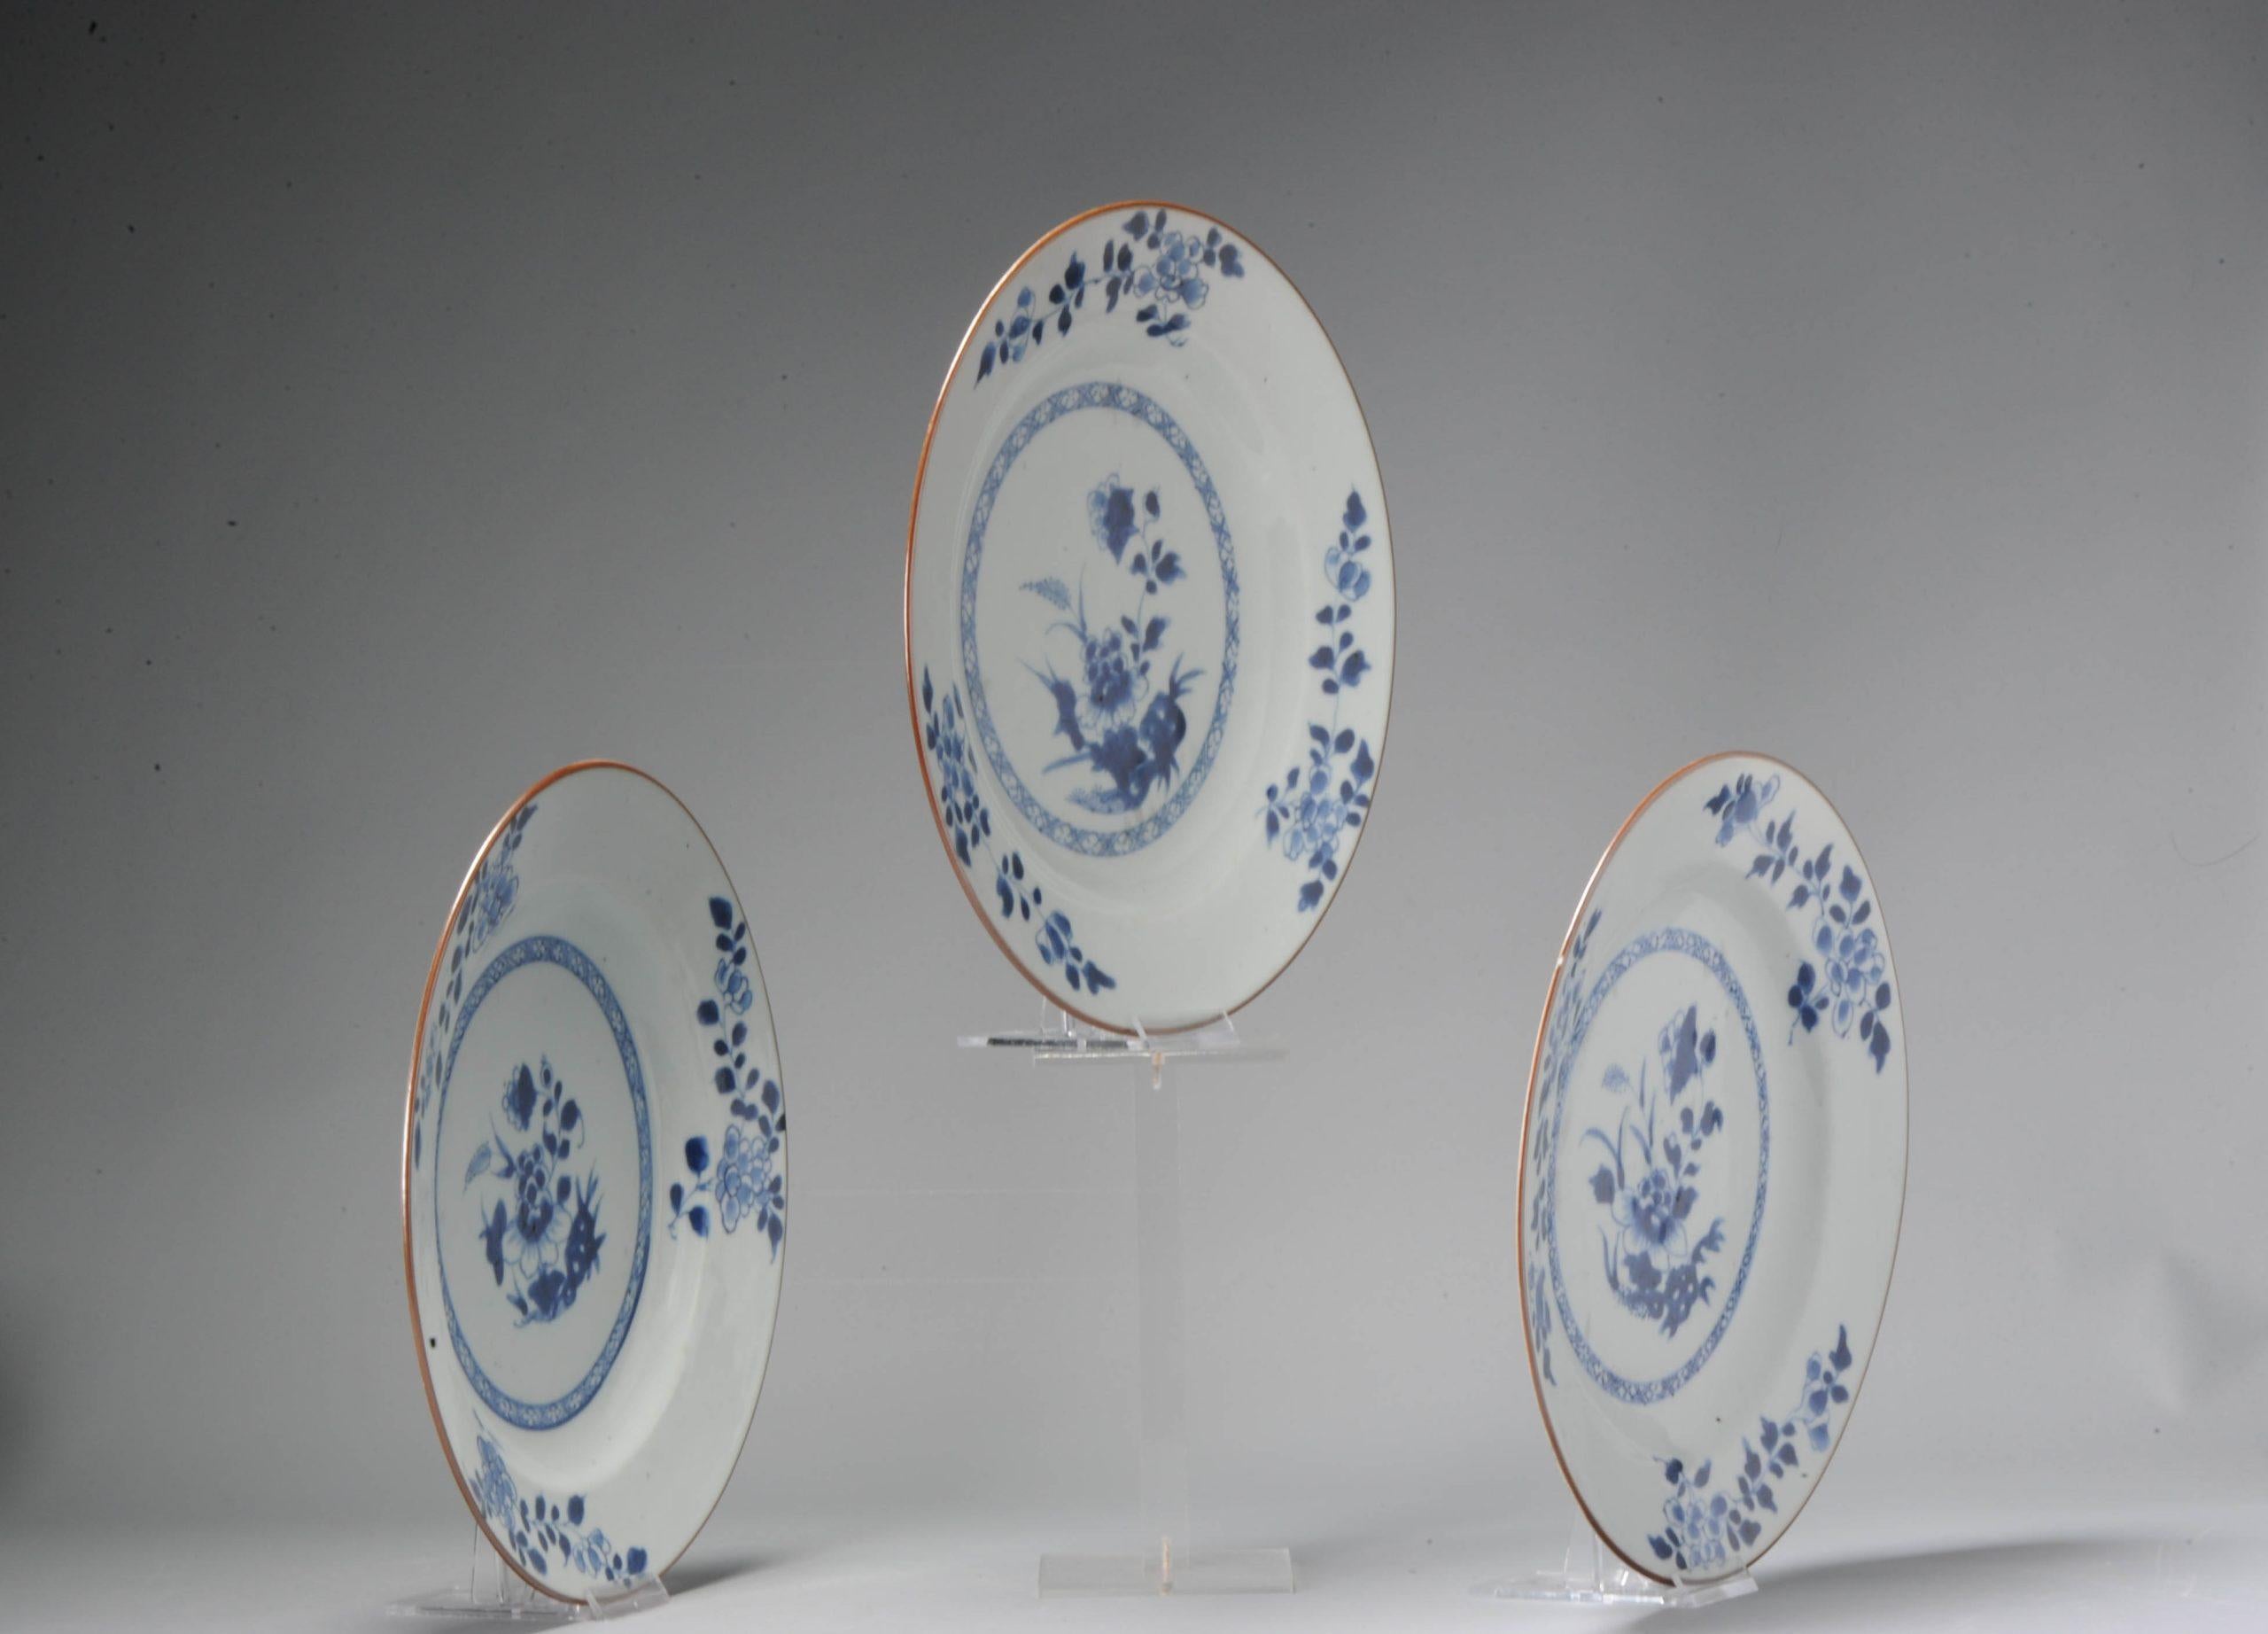 Fabulous quality blue and white porcelain plates.

Additional information:
Material: Porcelain & Pottery
Color: Blue & White
Region of Origin: China
Period: 17th century, 18th century Qing (1661 - 1912)
Age: Pre-1800
Condition: Close to perfect, all